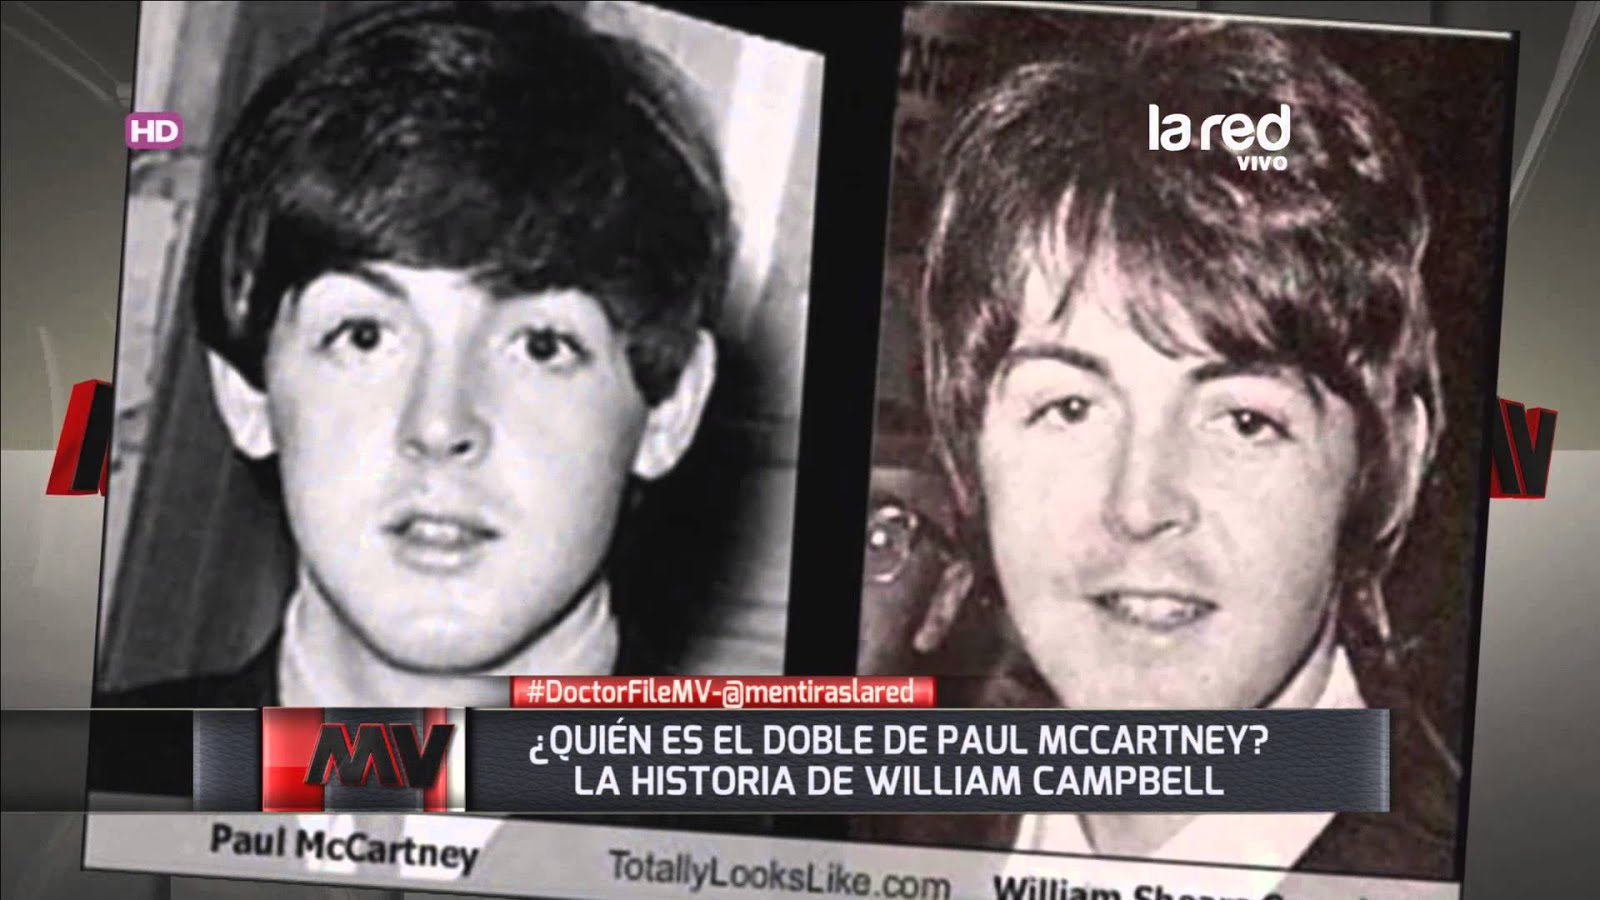 PAUL McCARTNEY "I WAS WILLIE CAMPBELL"